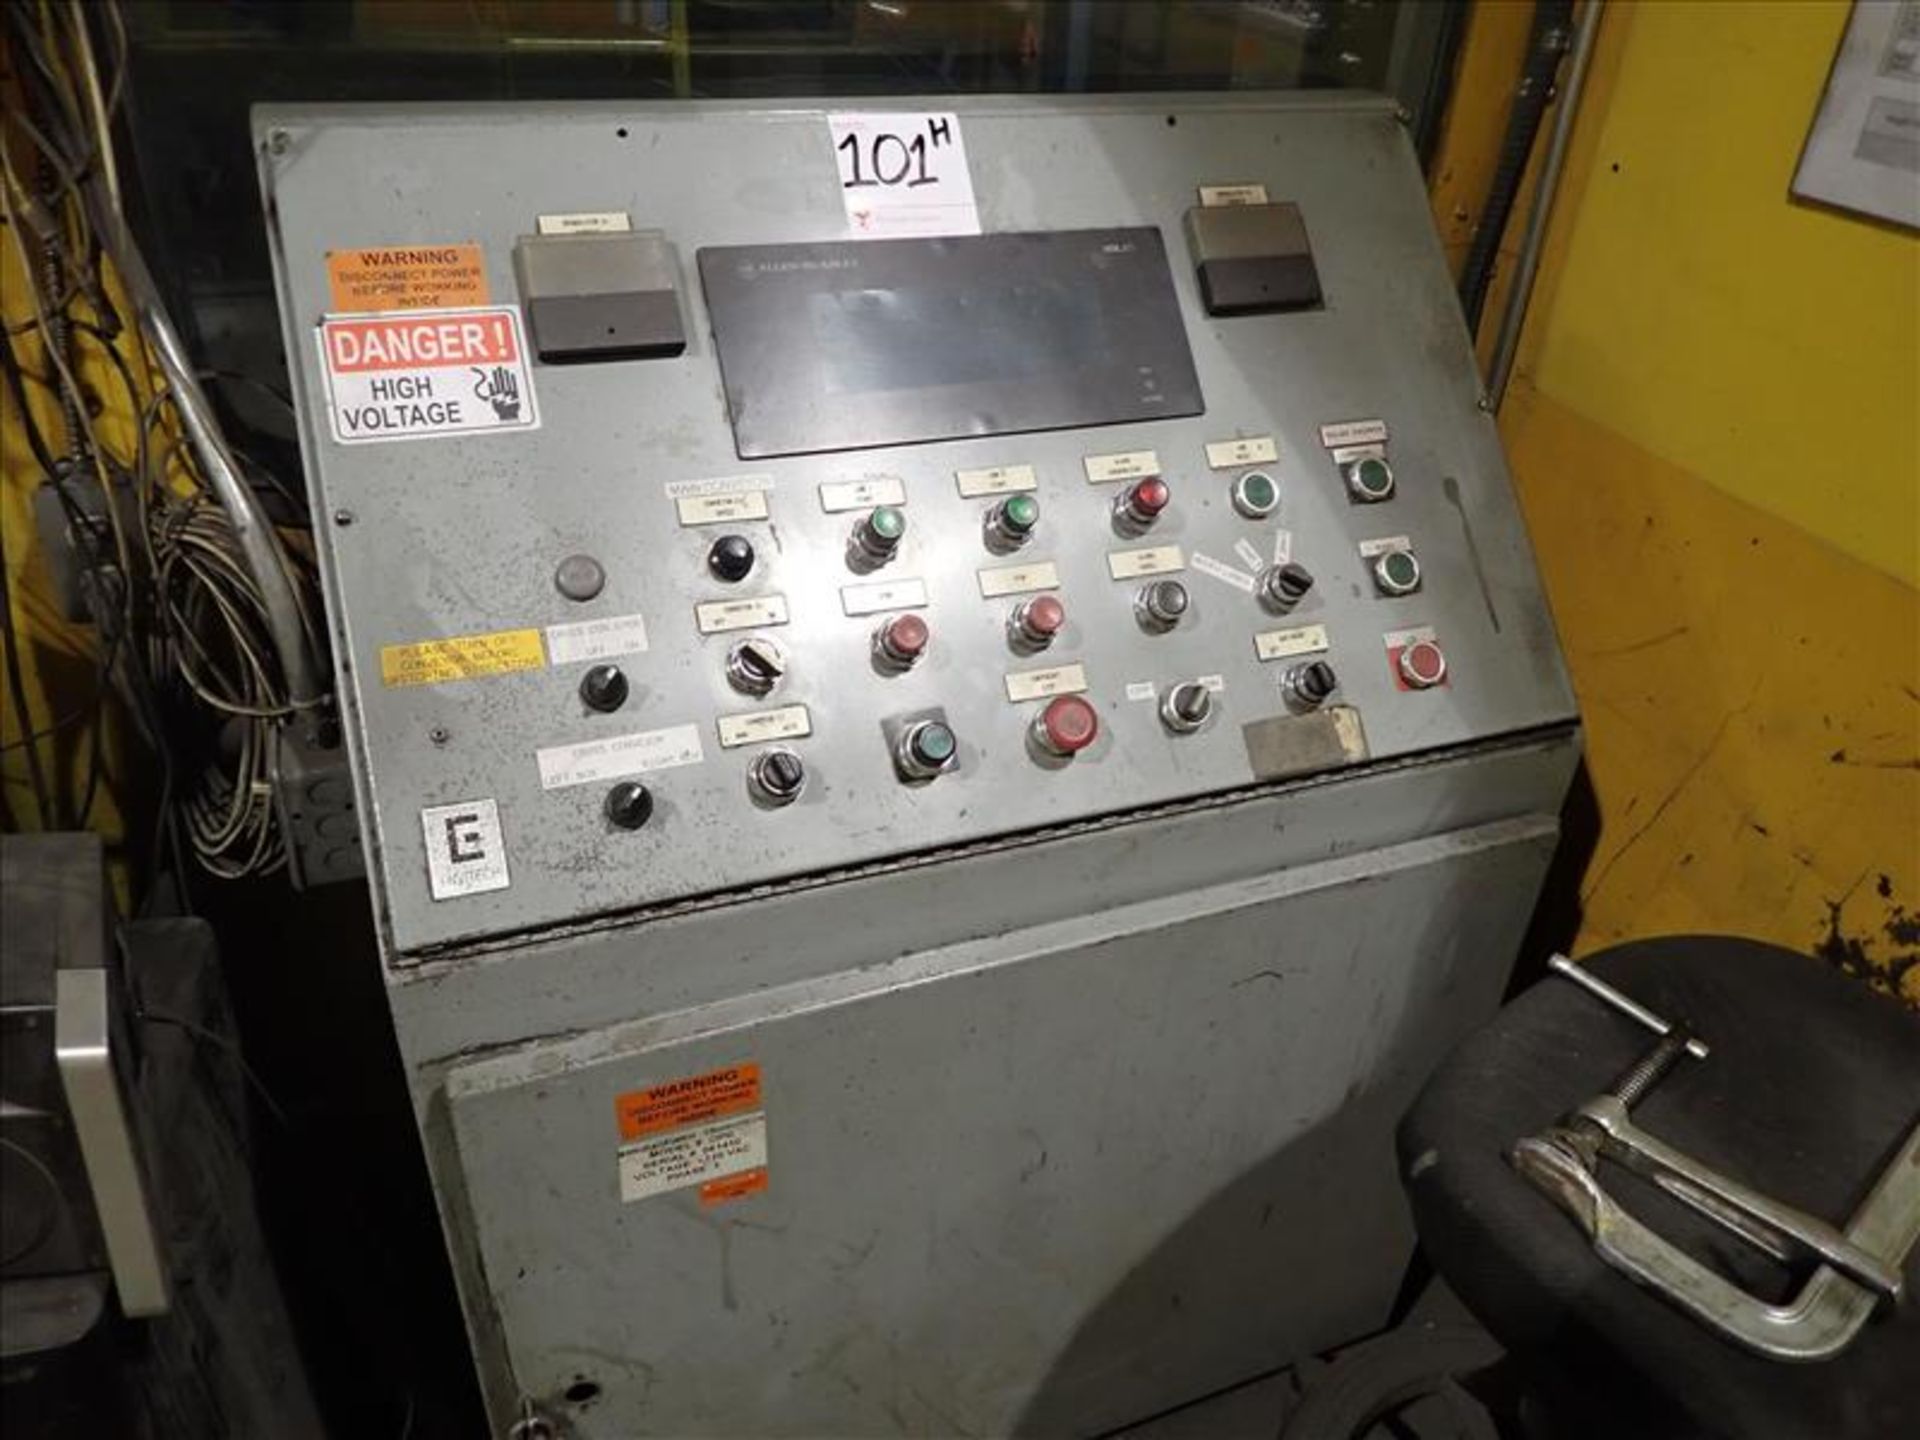 Evitech control panel for Prime Metals Shredding Line (Subject to confirmation)